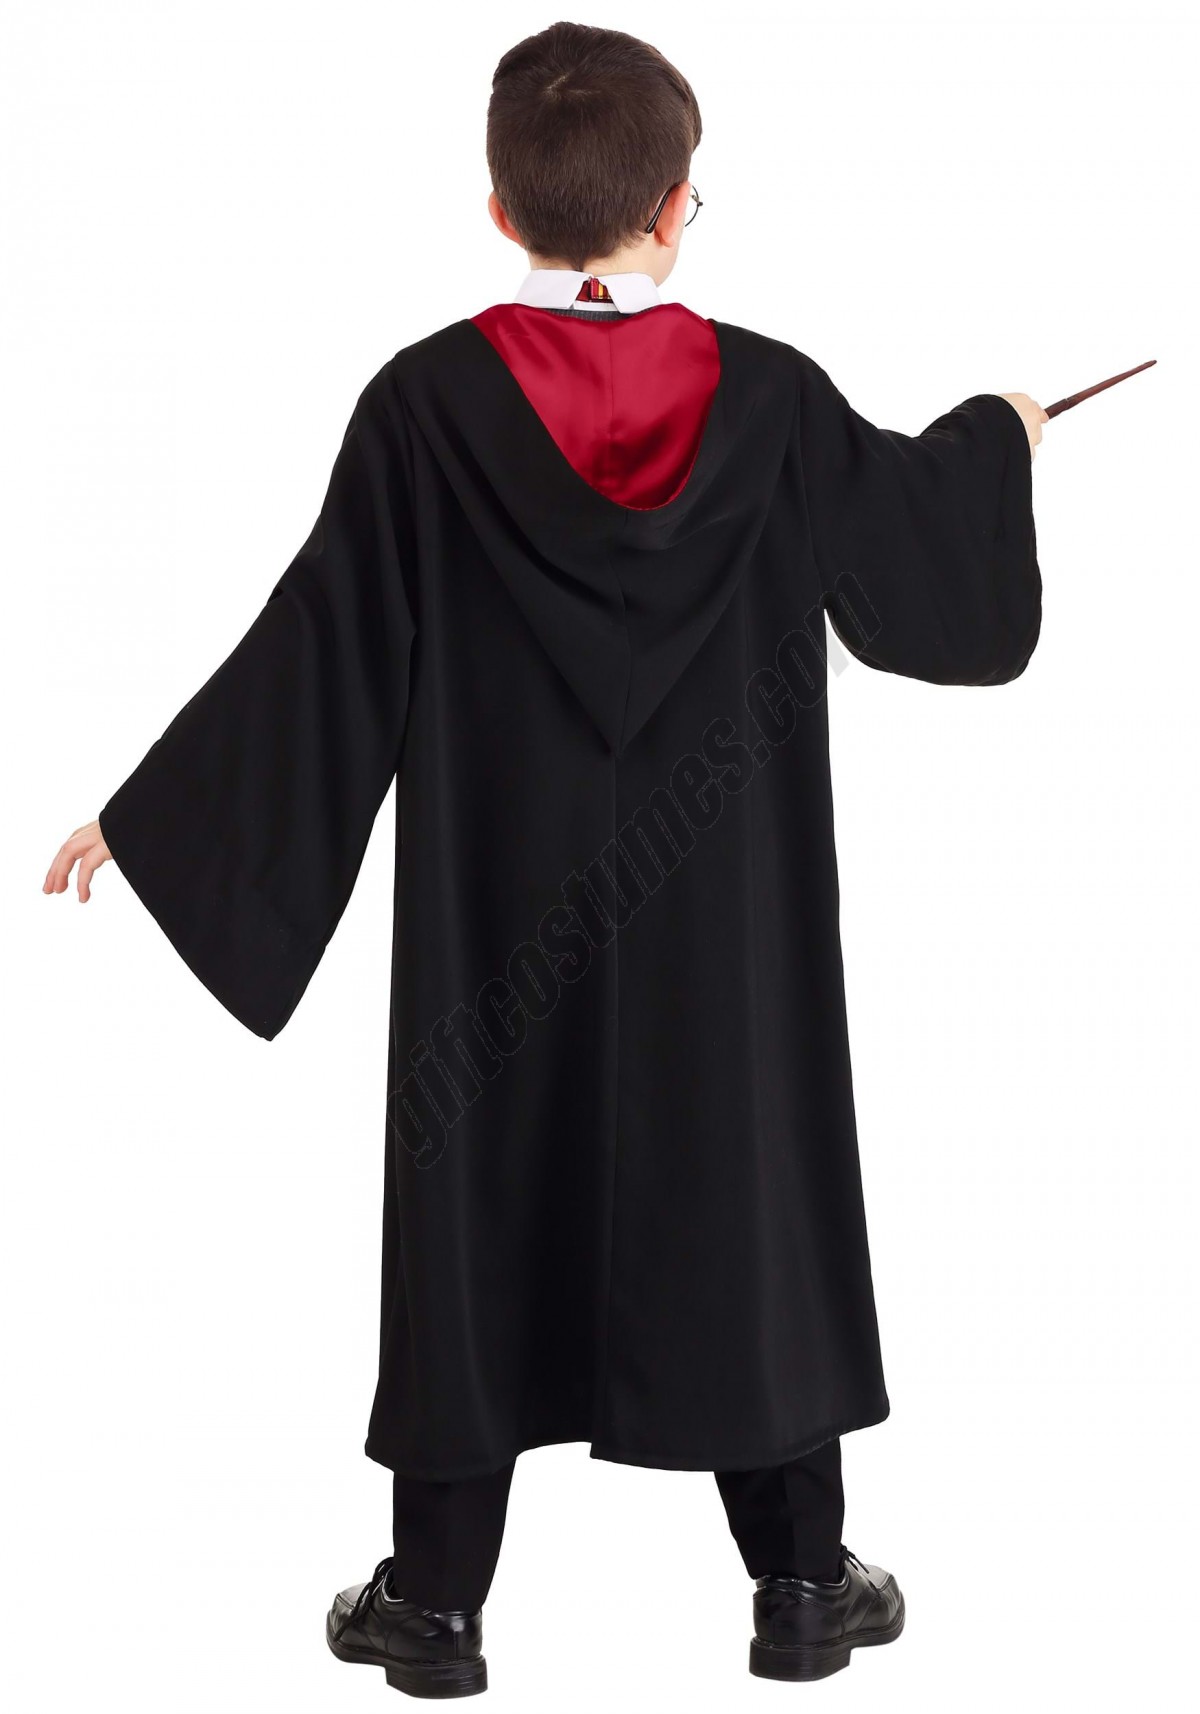 Deluxe Kid's Harry Potter Costume Promotions - -1